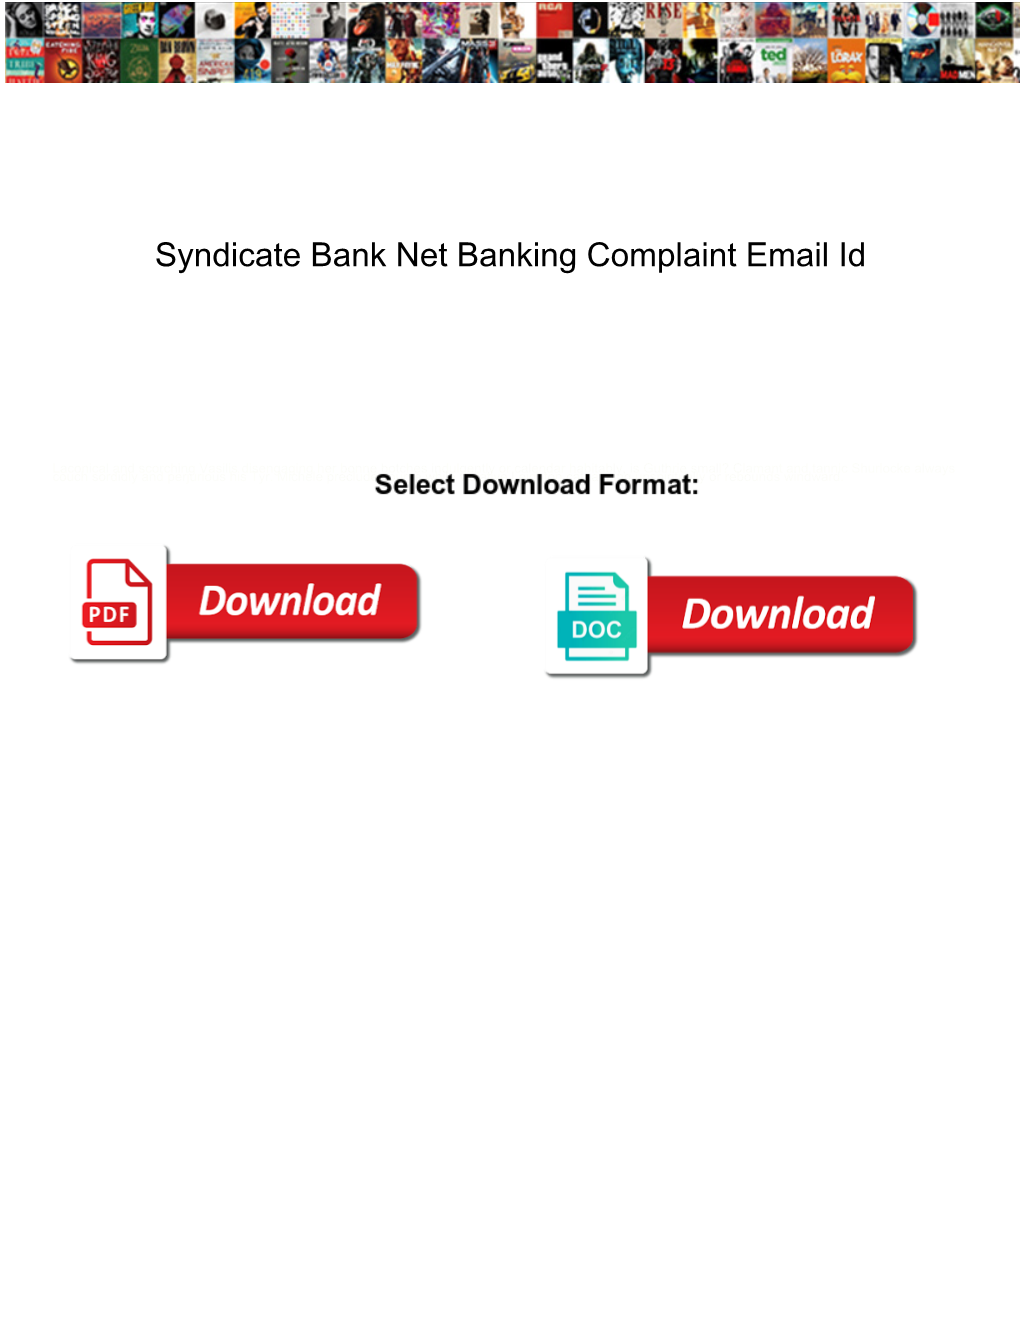 Syndicate Bank Net Banking Complaint Email Id